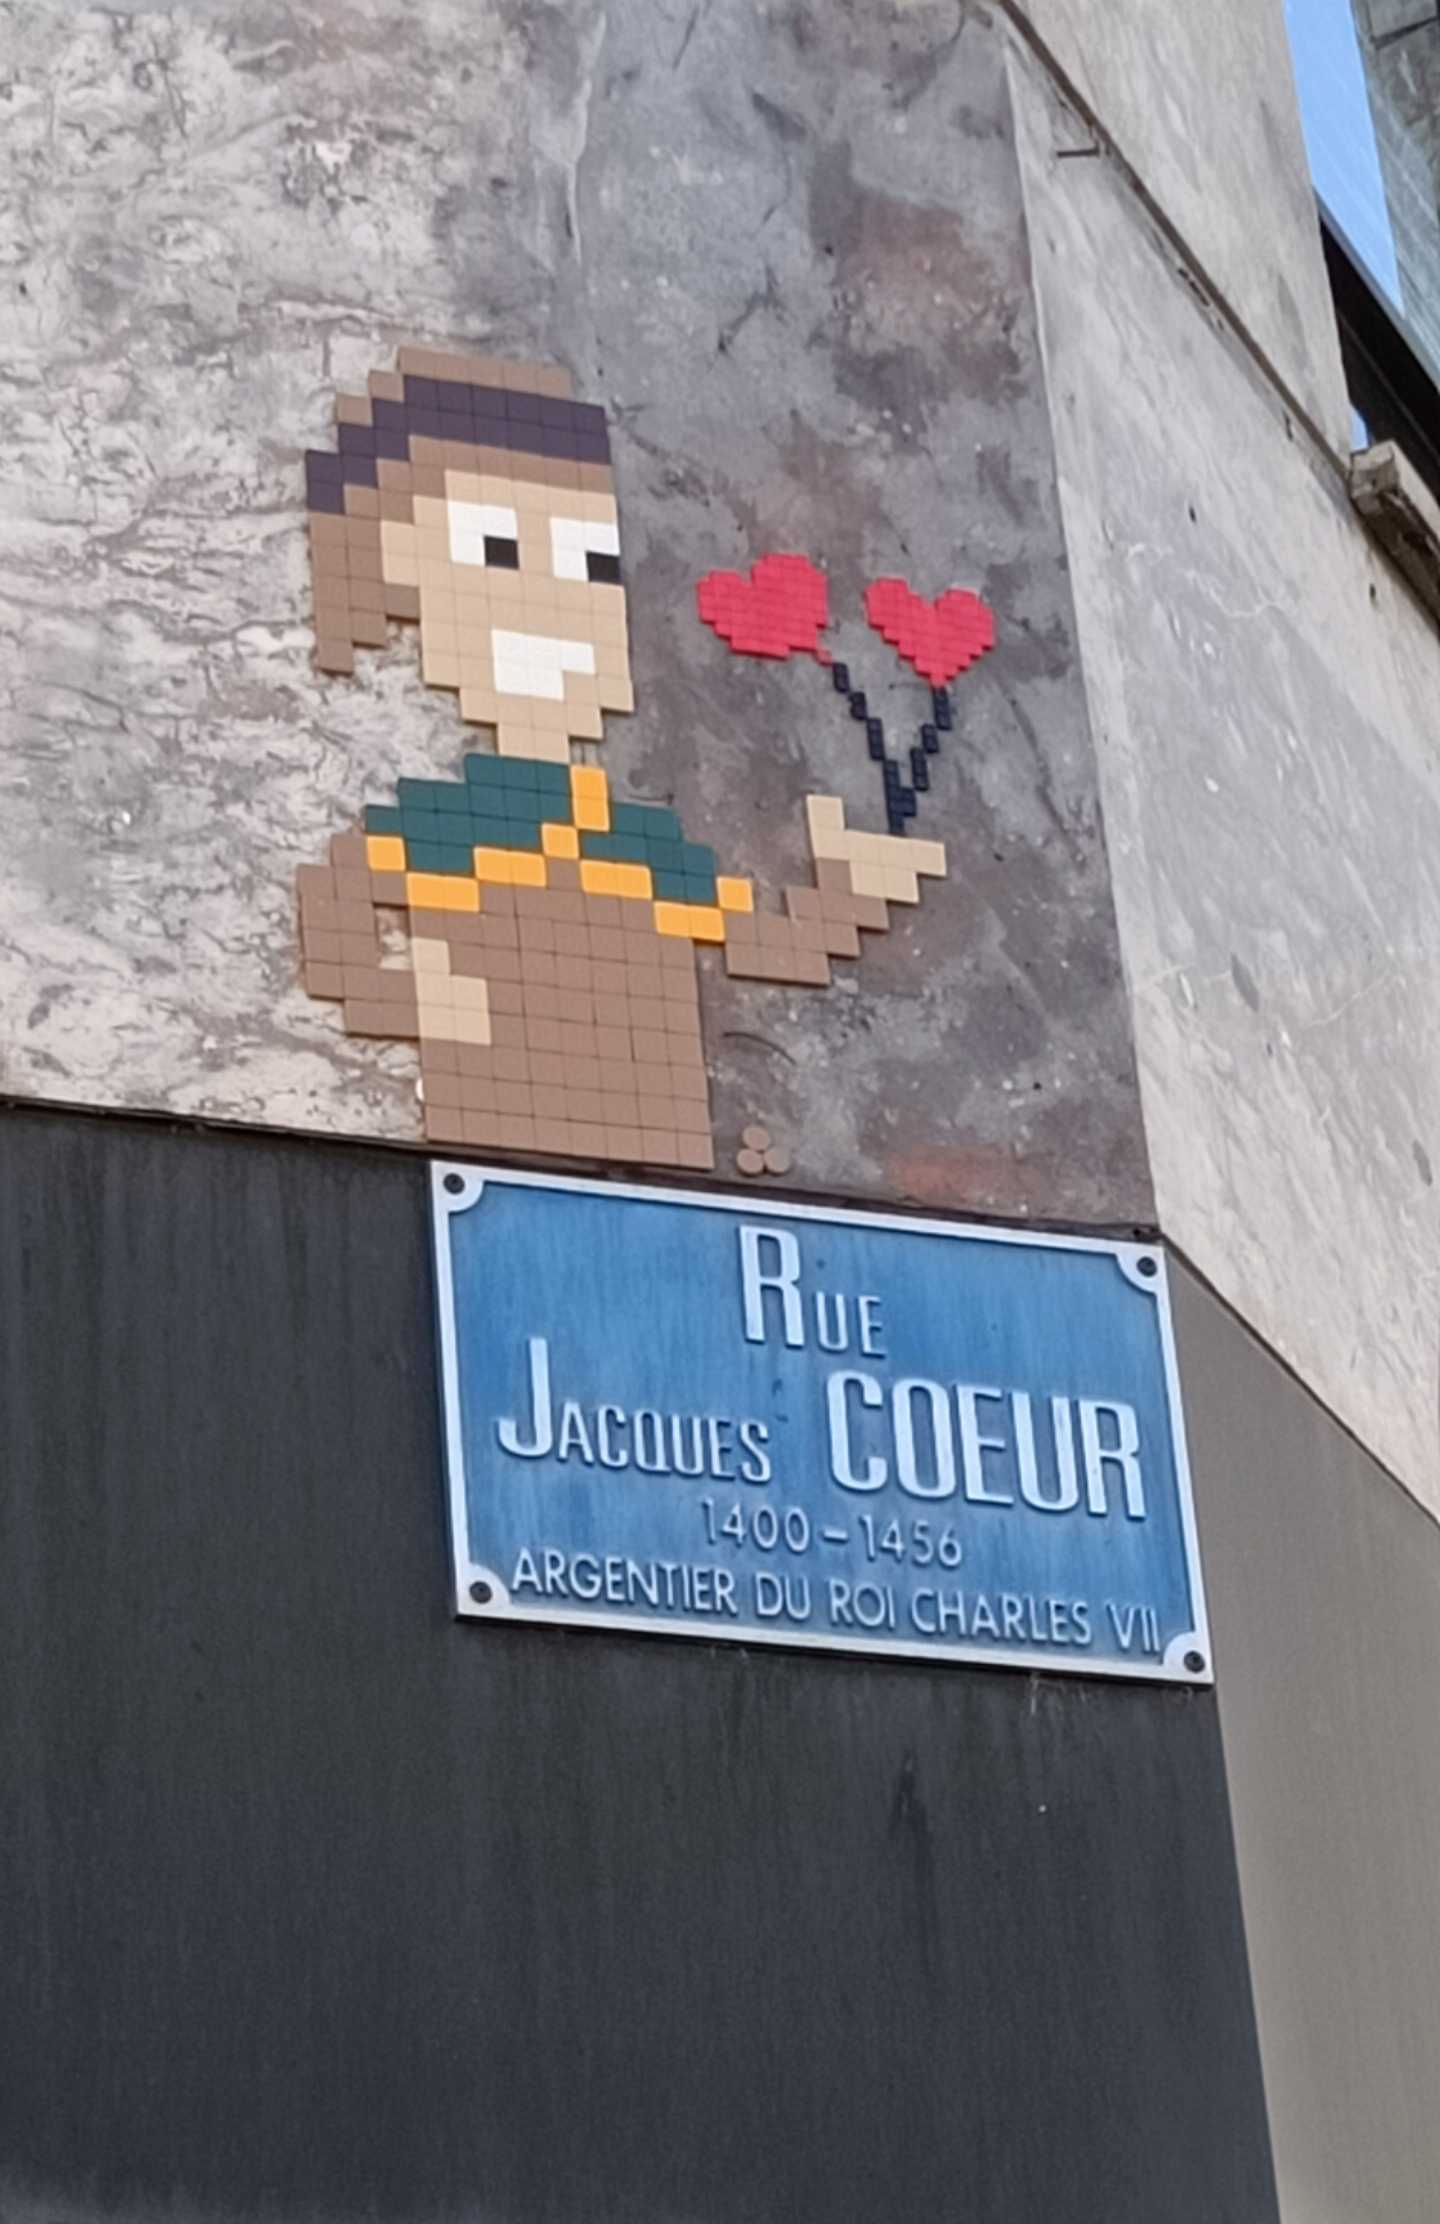 Mosaic 5748 Jacques Coeur  by the artist Mifamosa captured by Rabot in Bourges France